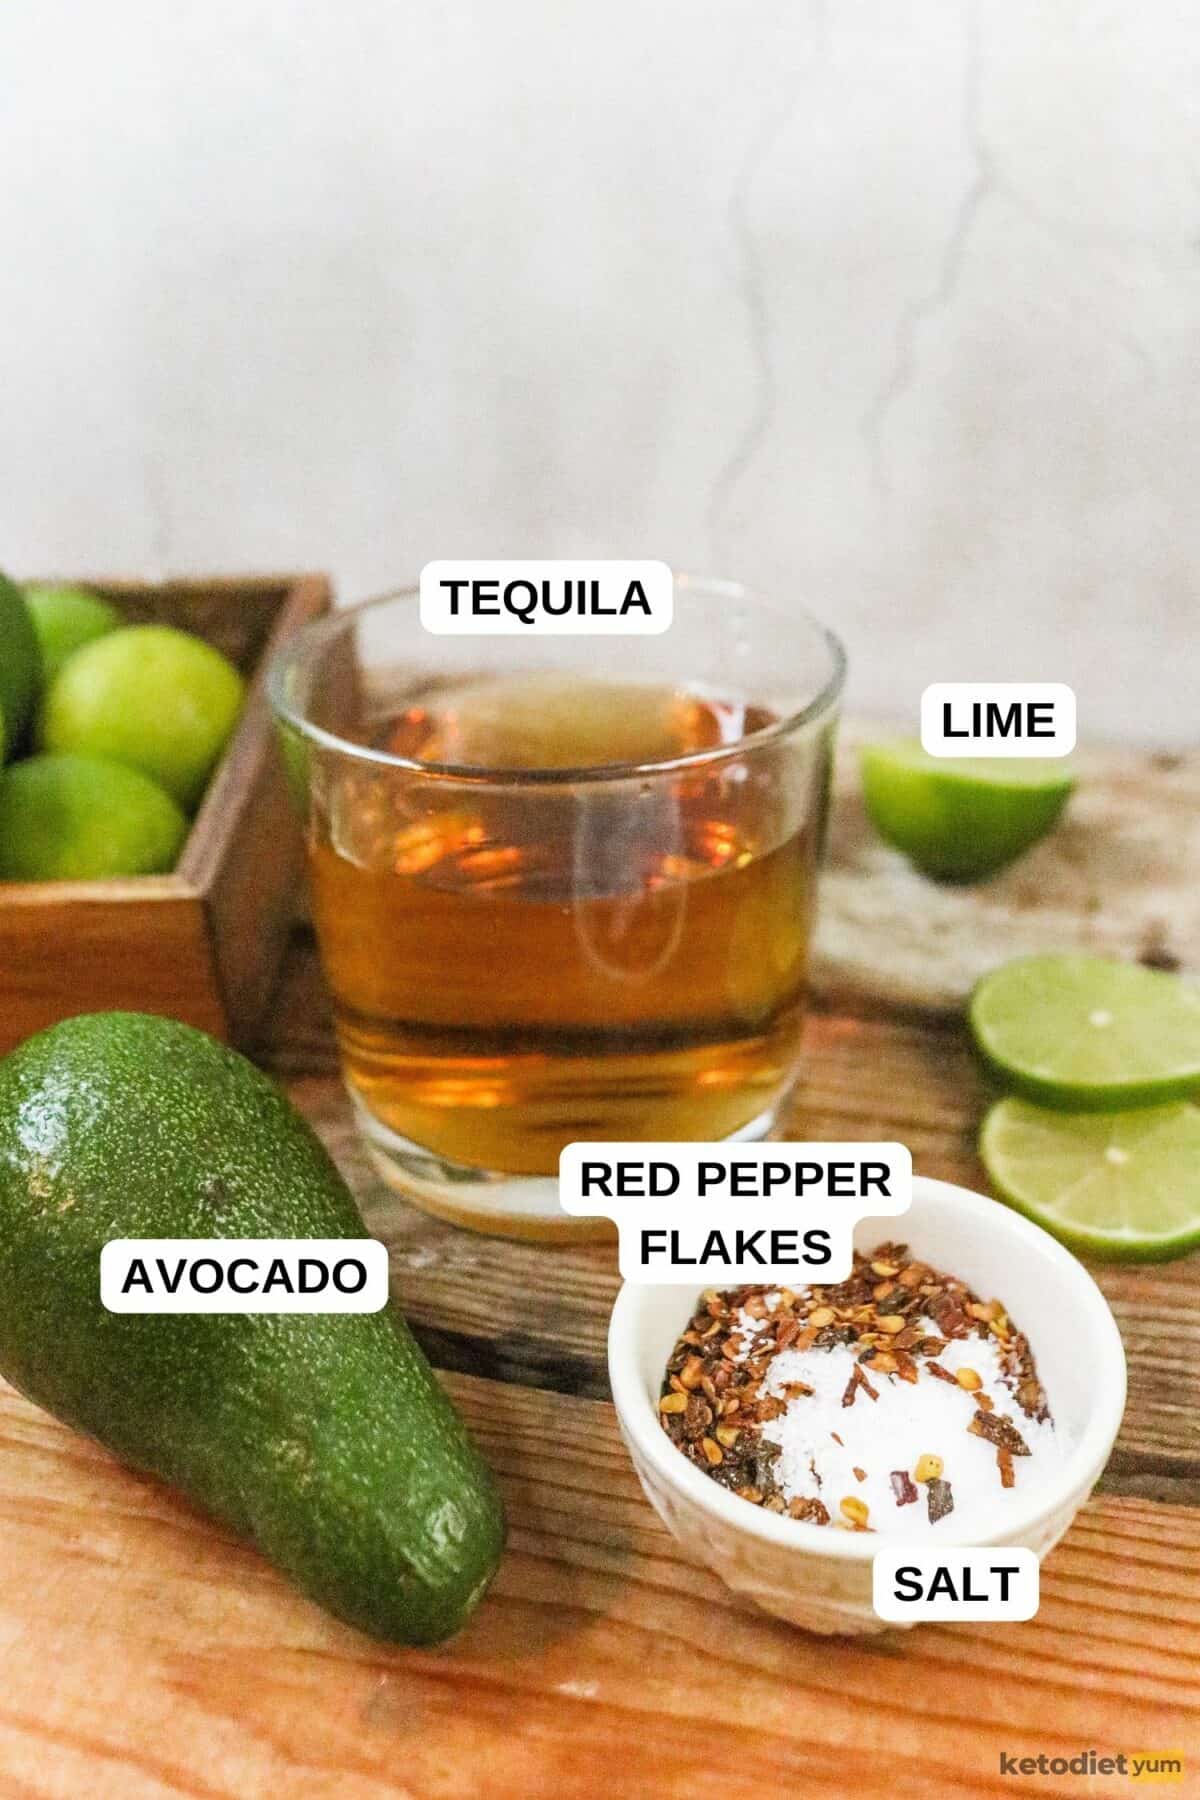 Avocado, sliced limes, whole limes, glass of tequila and bowl of red pepper flakes and salt on a table